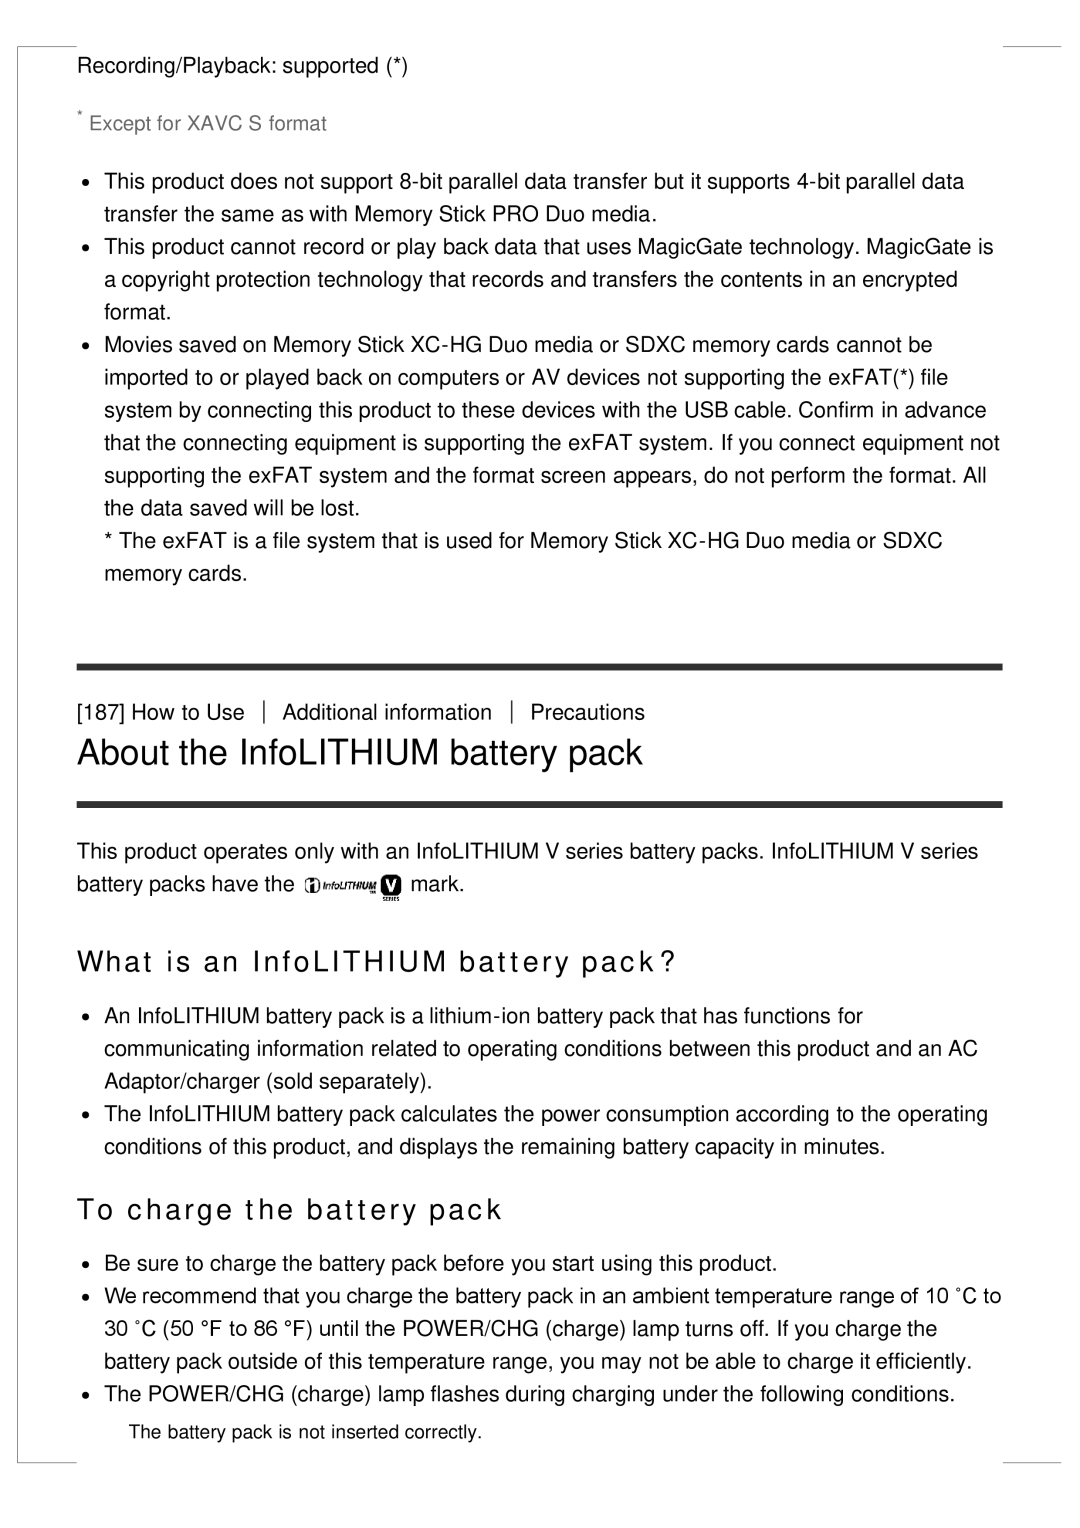 Sony FDR-AX100 manual About the InfoLITHIUM battery pack, What is an InfoLITHIUM battery pack?, To charge the battery pack 